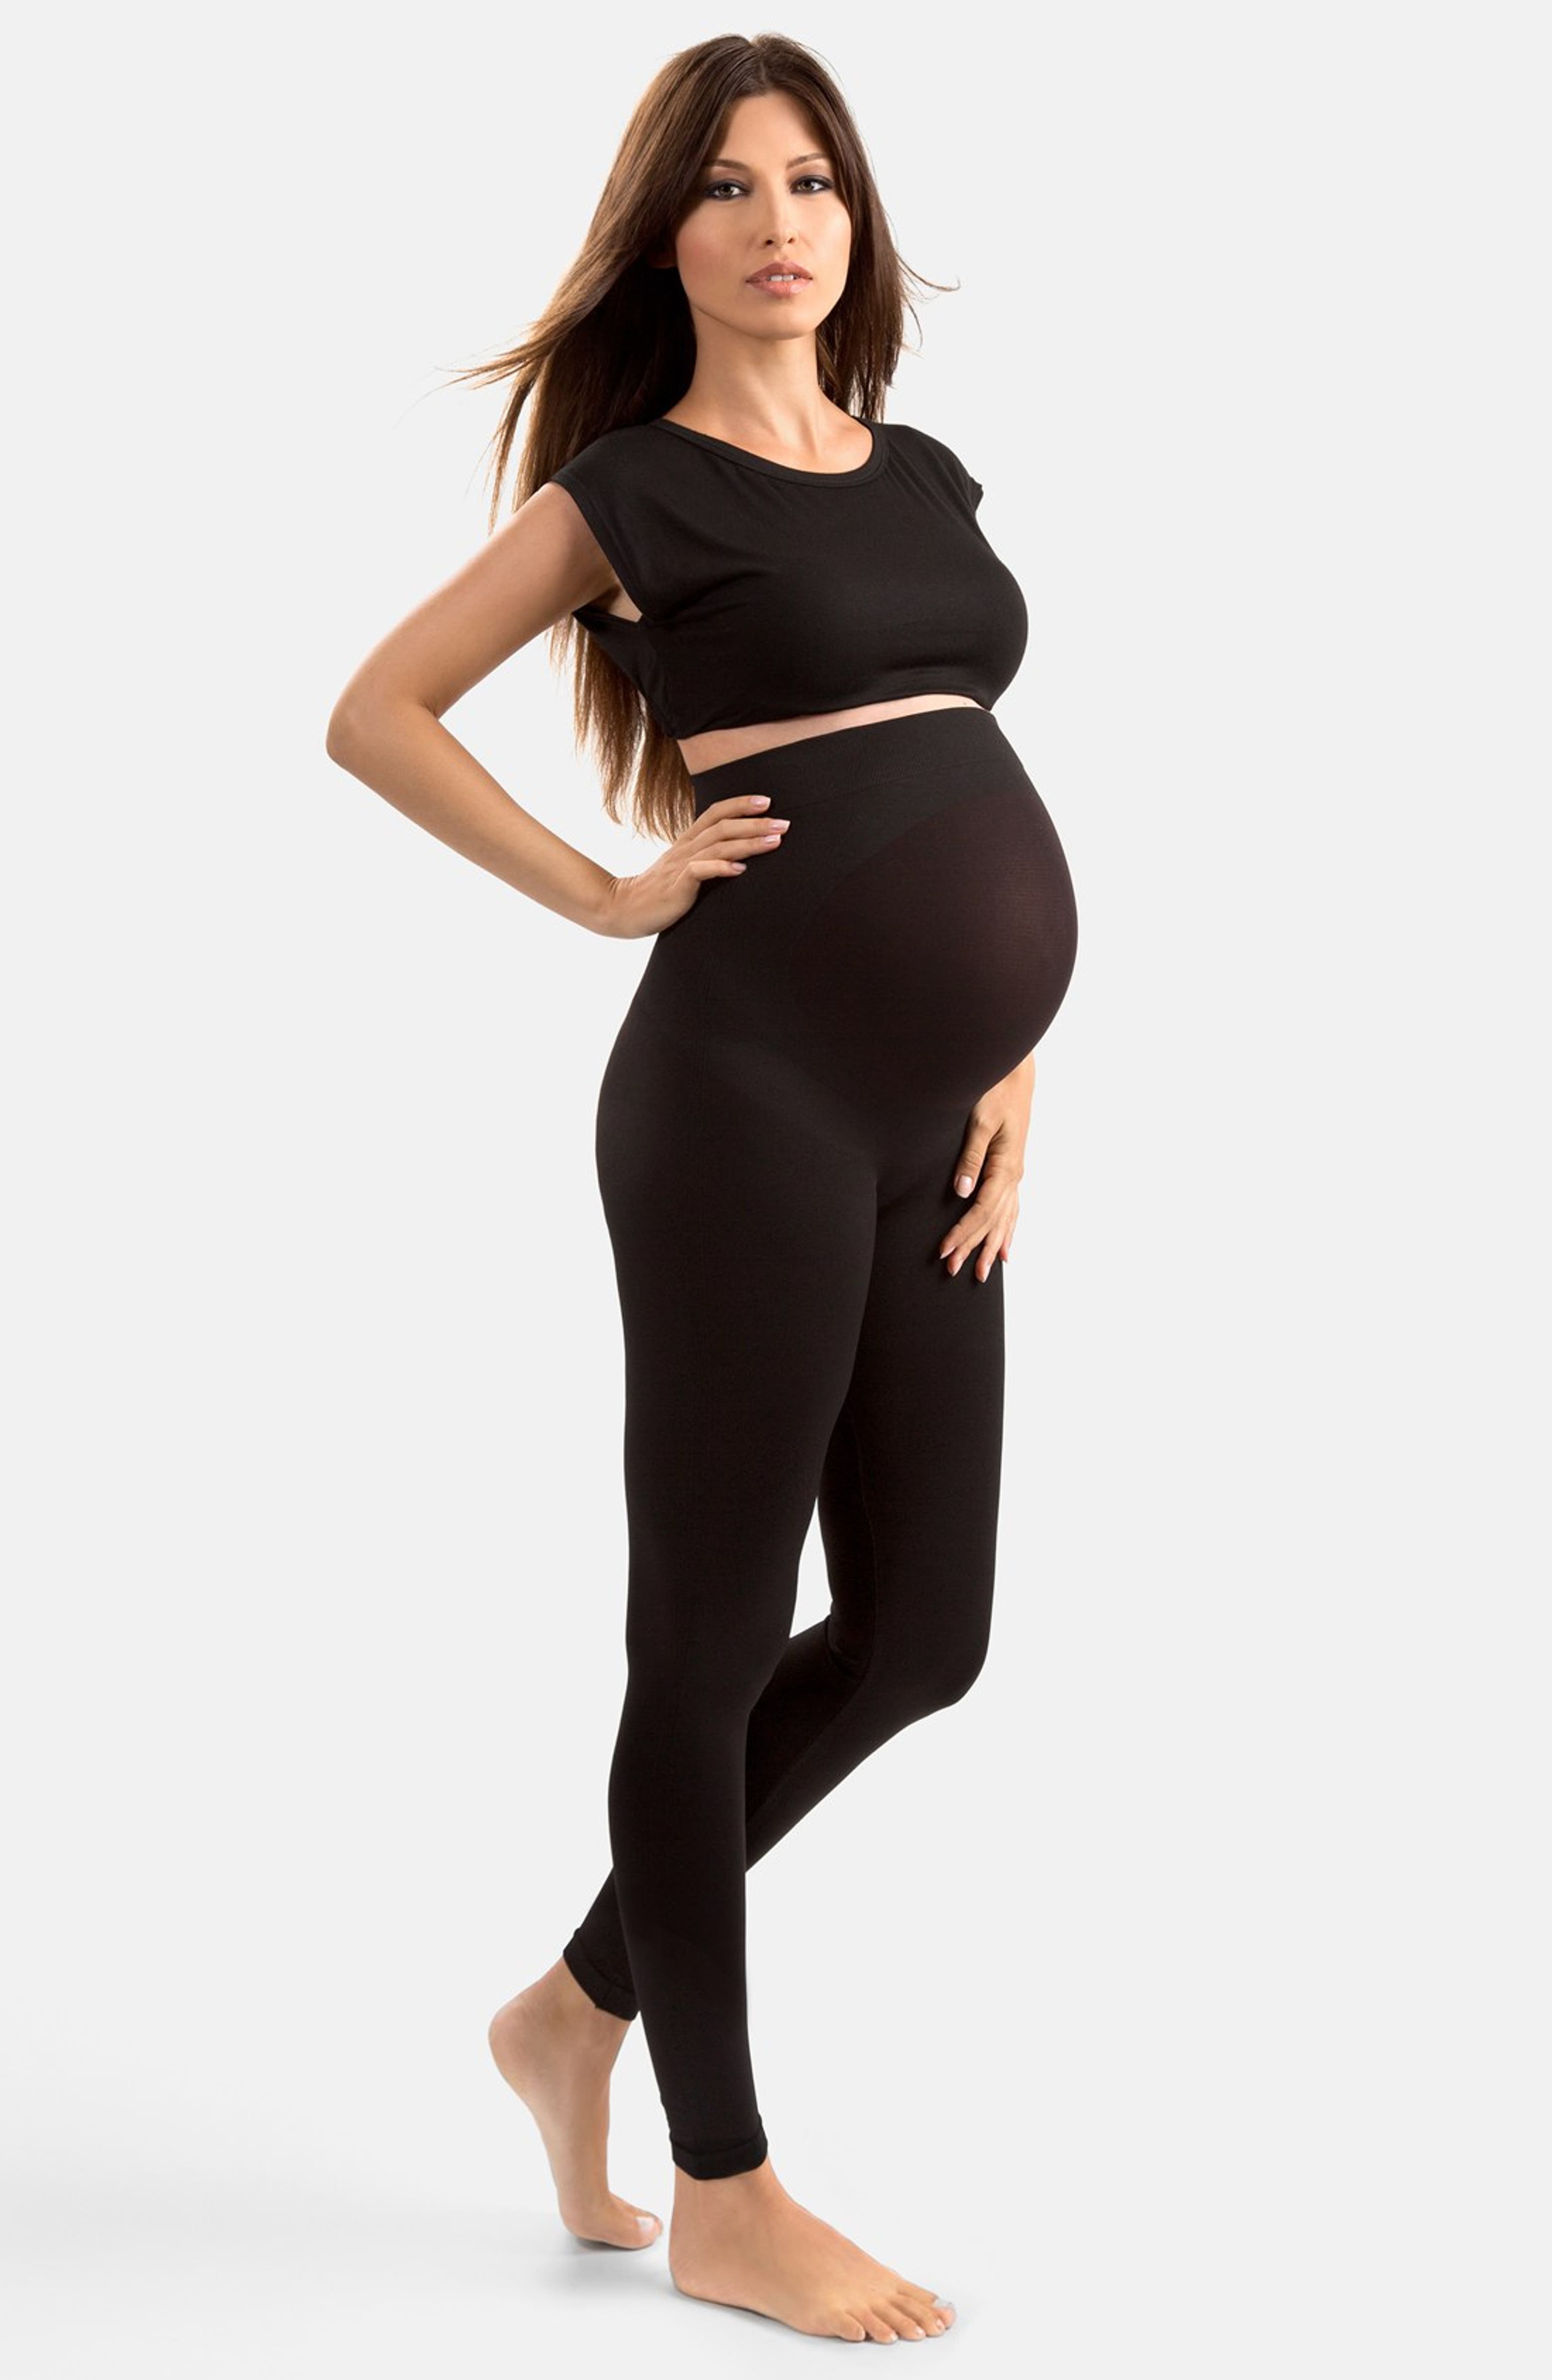 Maternity Leggings: Stylish and Supportive